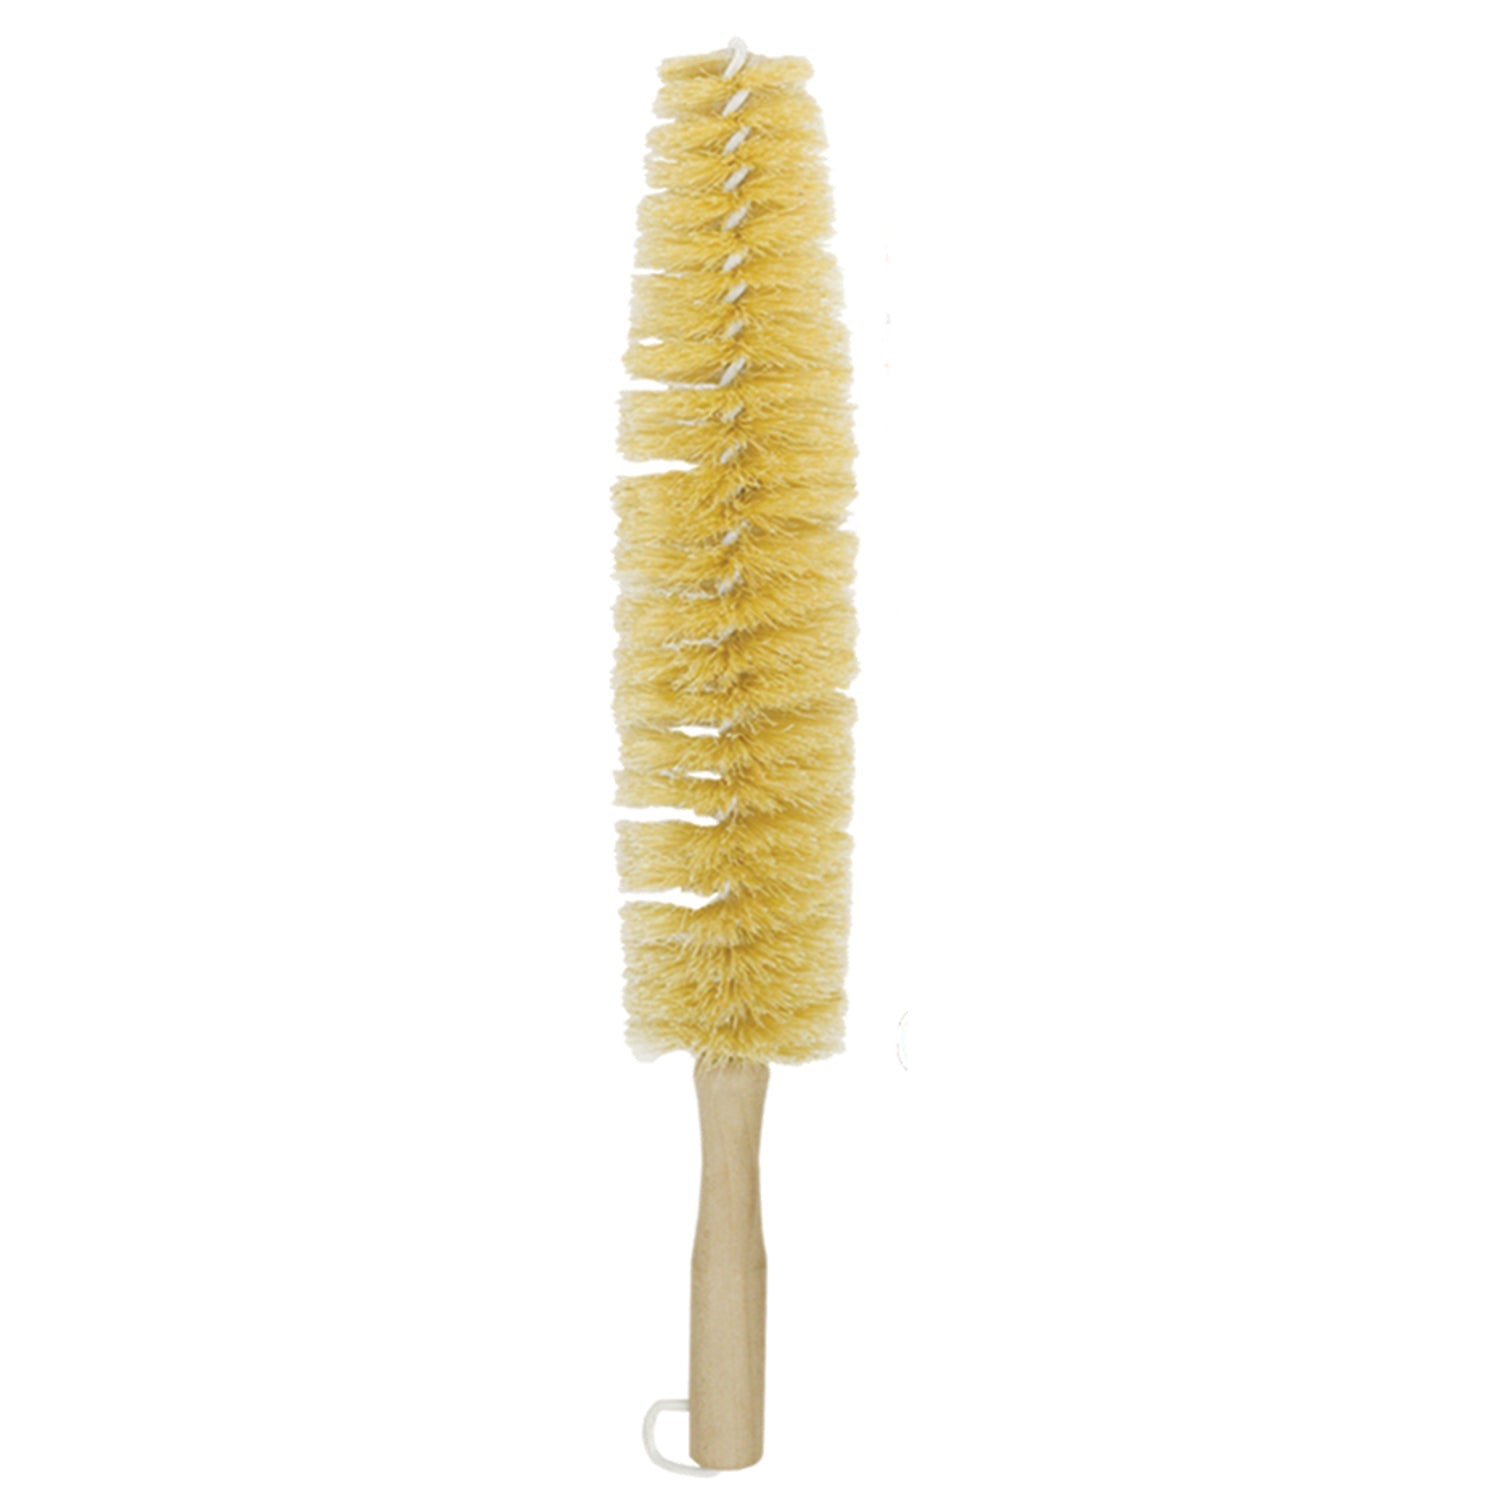 Large 17" Spoke Wheel Brush with plastic coated wire